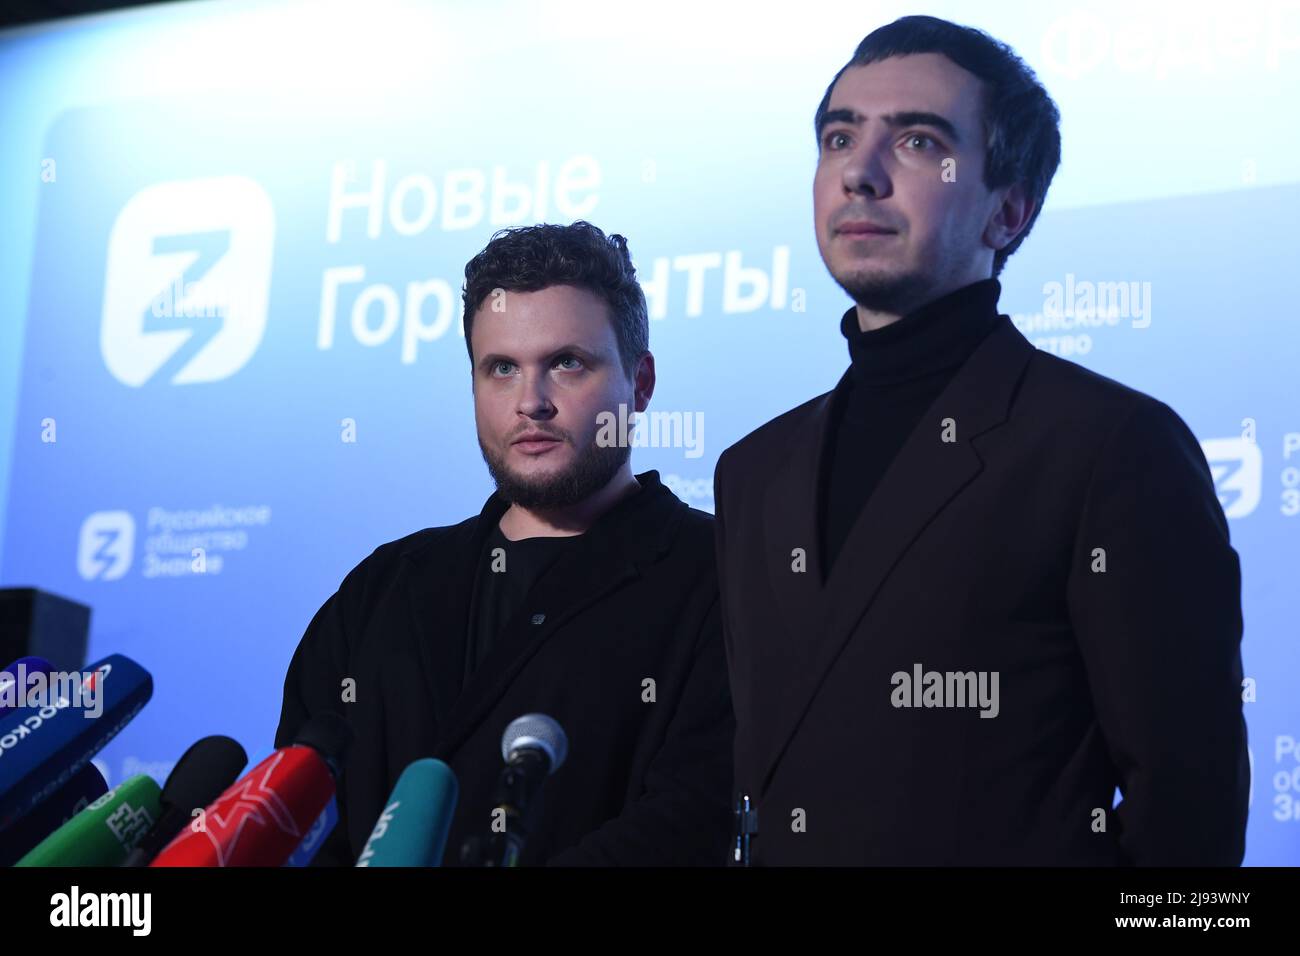 Moscow. Prankers Alexey Stolyarov (Lexus) and Vladimir Kuznetsov (Vovan) (at the left naprvo) during performance 'An intellectual prank call: new ways of obtaining exclusive information. The theory and practice' within work of the section 'New Horizons'. Stock Photo